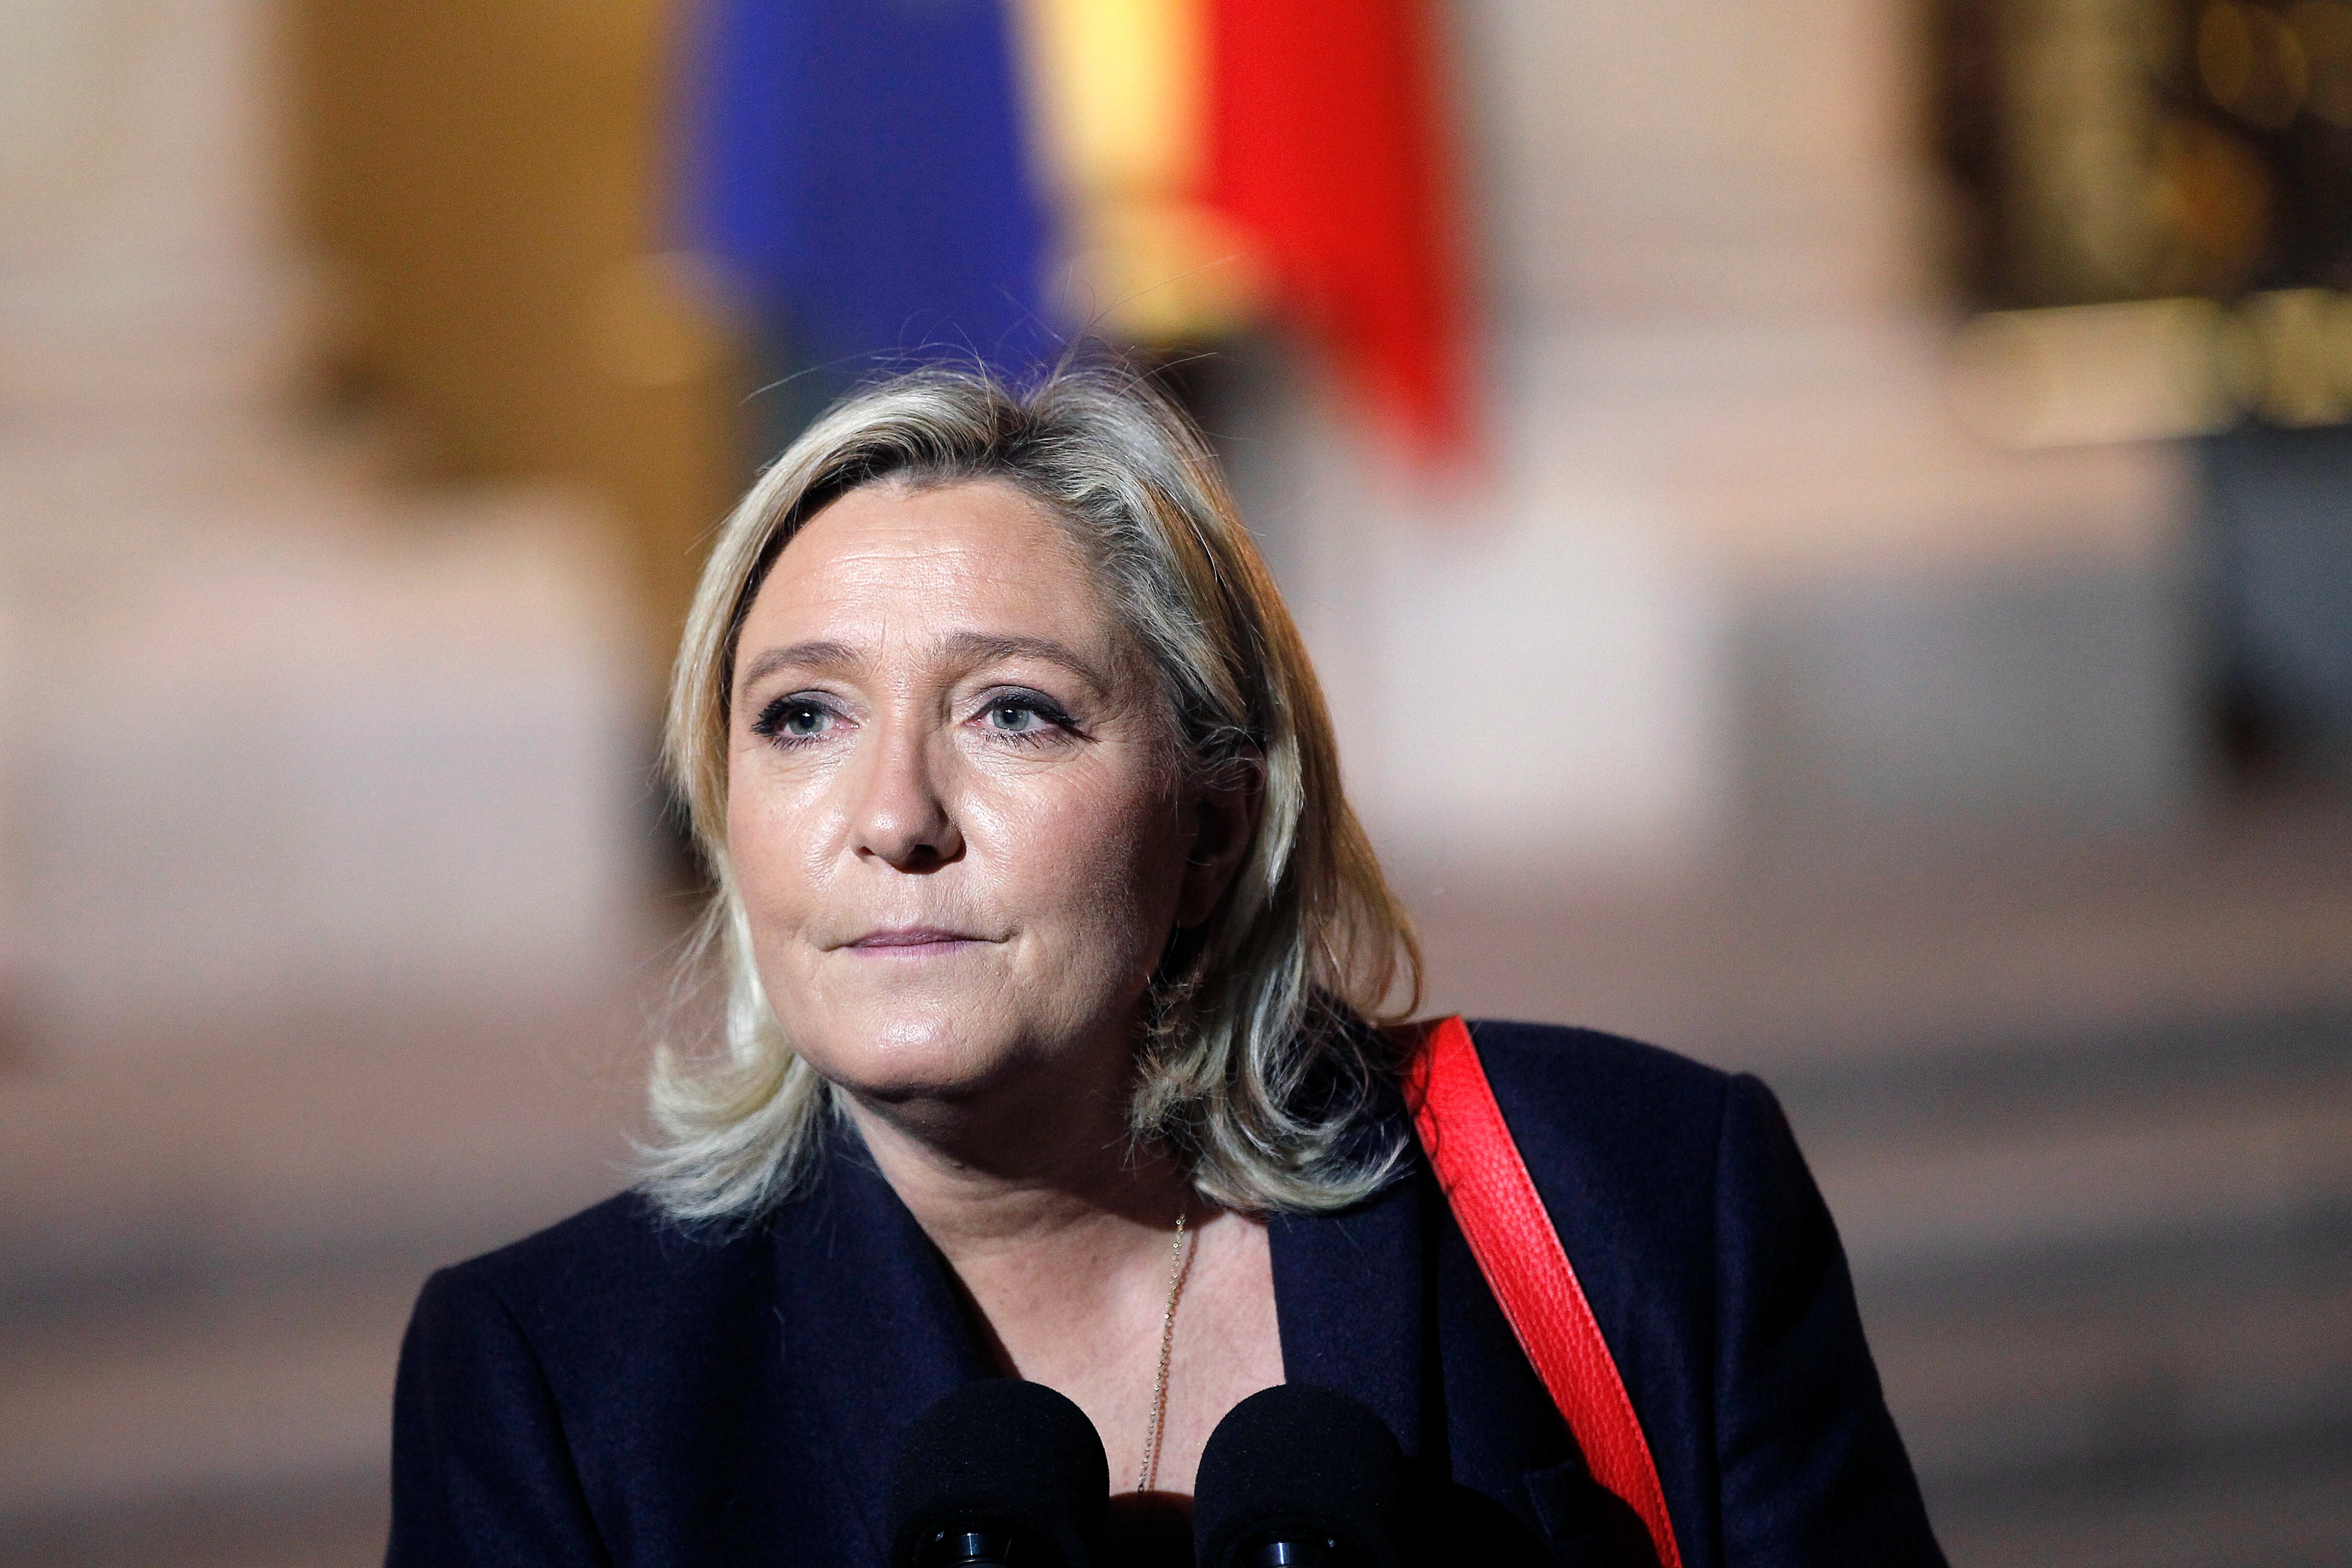 French leader of the French Far-right party Front National (FN) Marine Le Pen arrives at the Elysee Presidential Palace for a meeting with French President Francois Hollande in Paris on Nov. 15, 2015. (Thierry Chesnot—Getty Images)